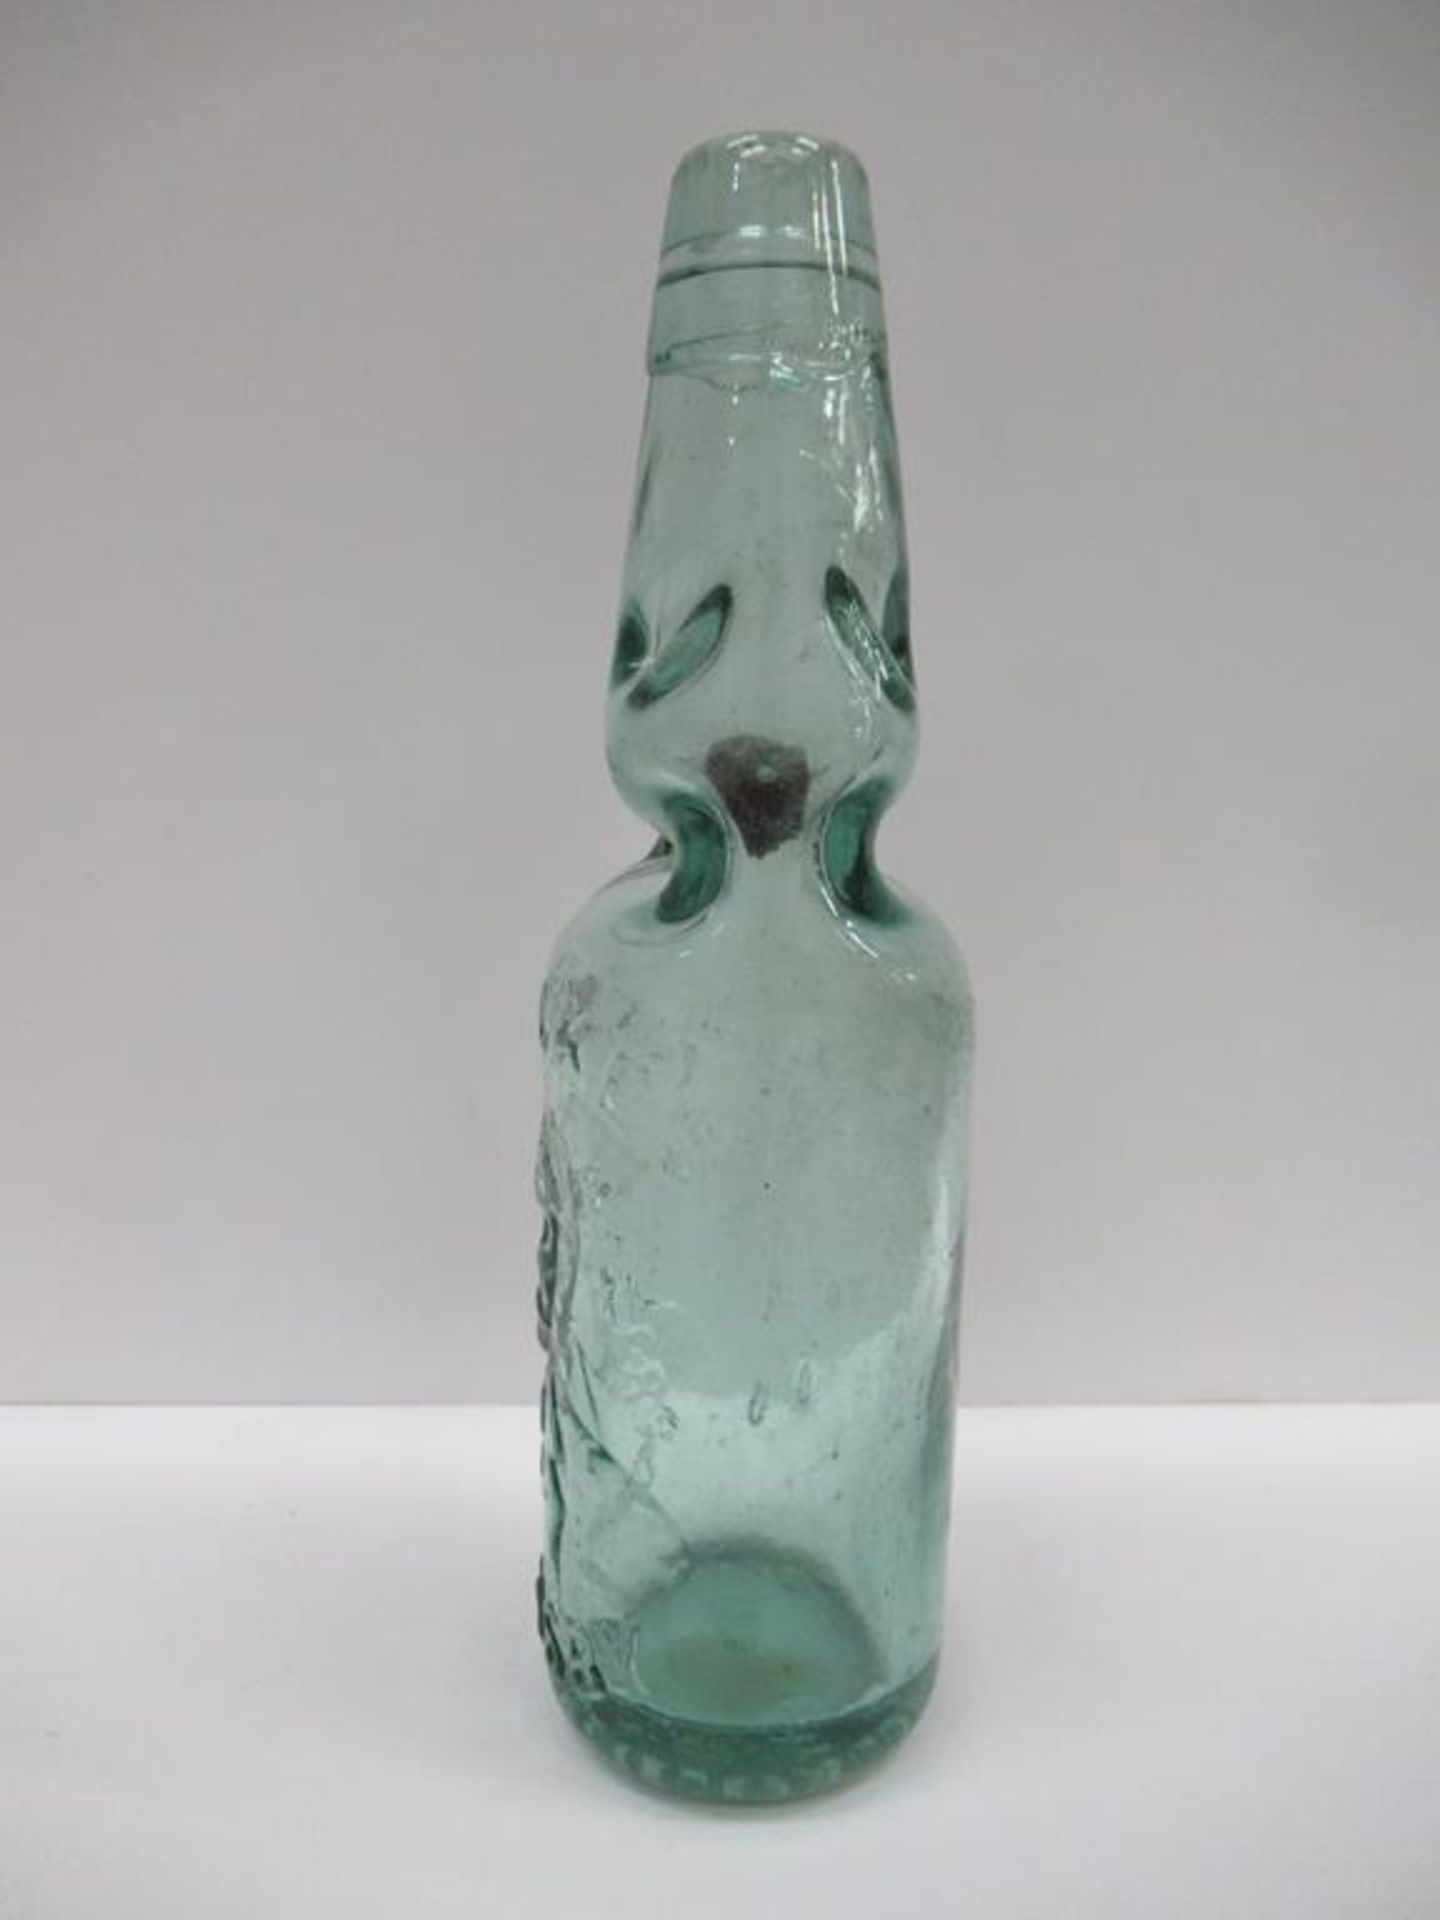 Grimsby Reinecke's Aerated Waters codd bottle with coloured marble 10oz - Image 4 of 9